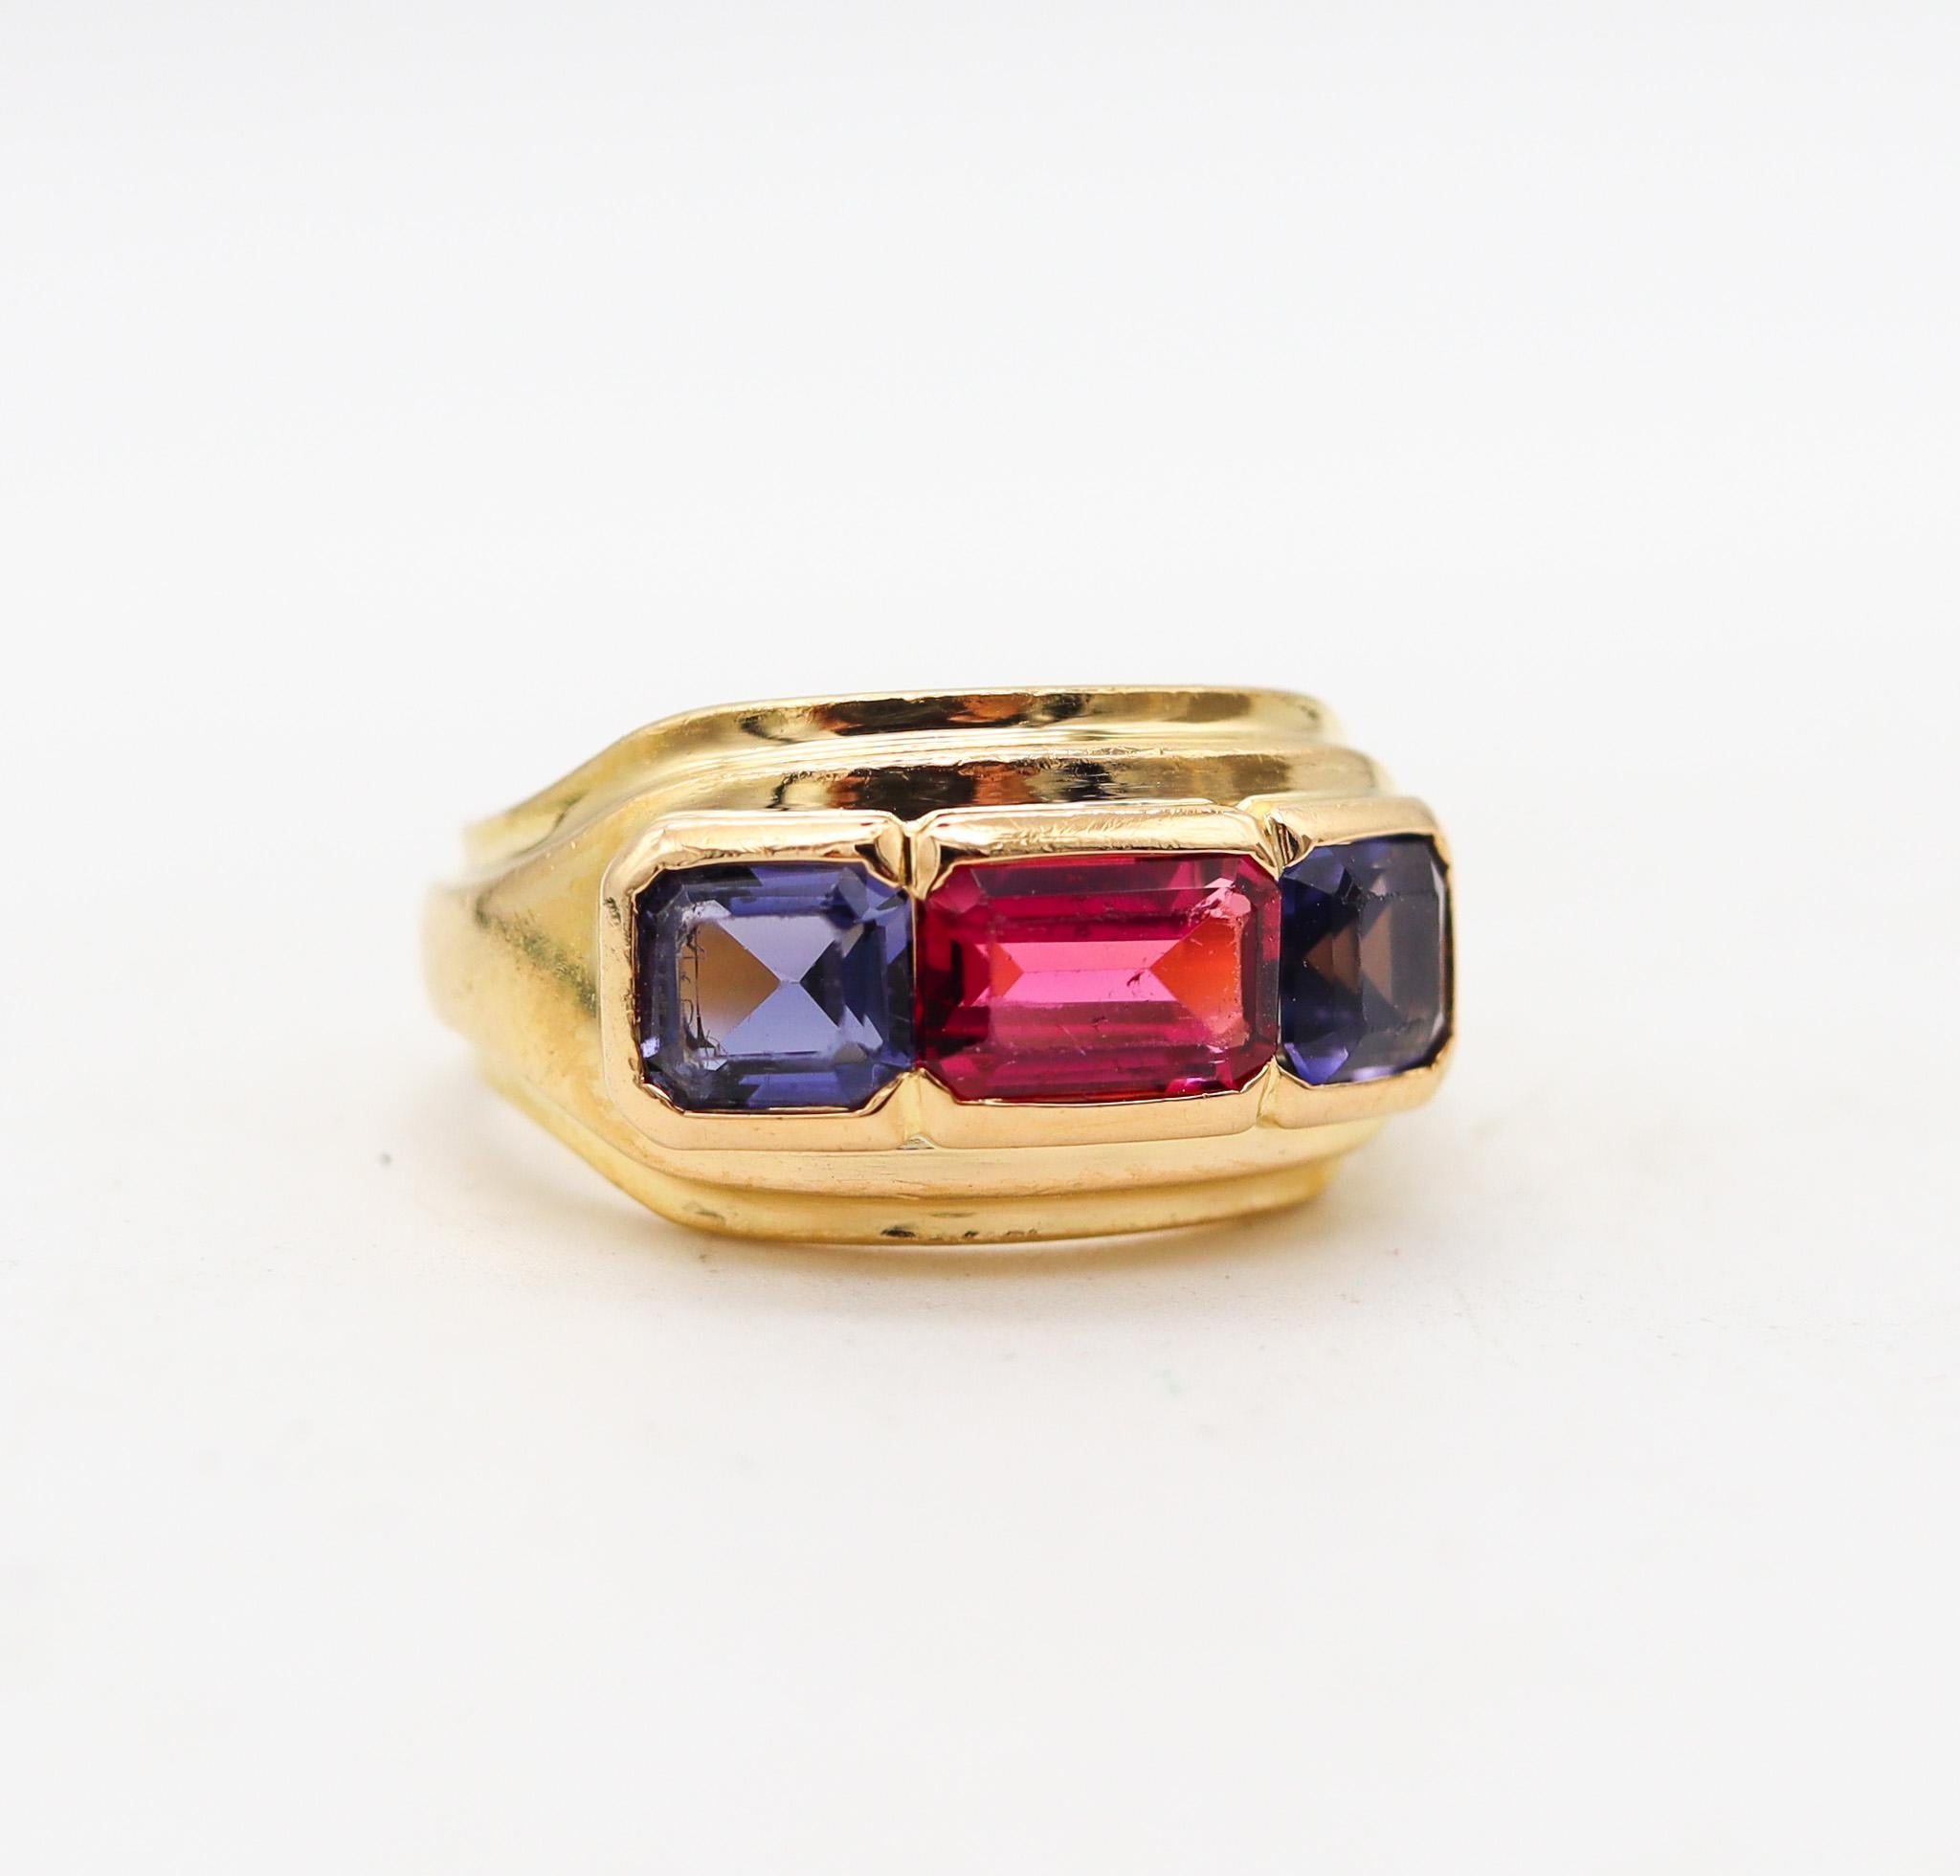 Modernist Bvlgari France Three Gems Ring In 18Kt Gold With 2.18 Ctw In Tourmaline & Iolite For Sale